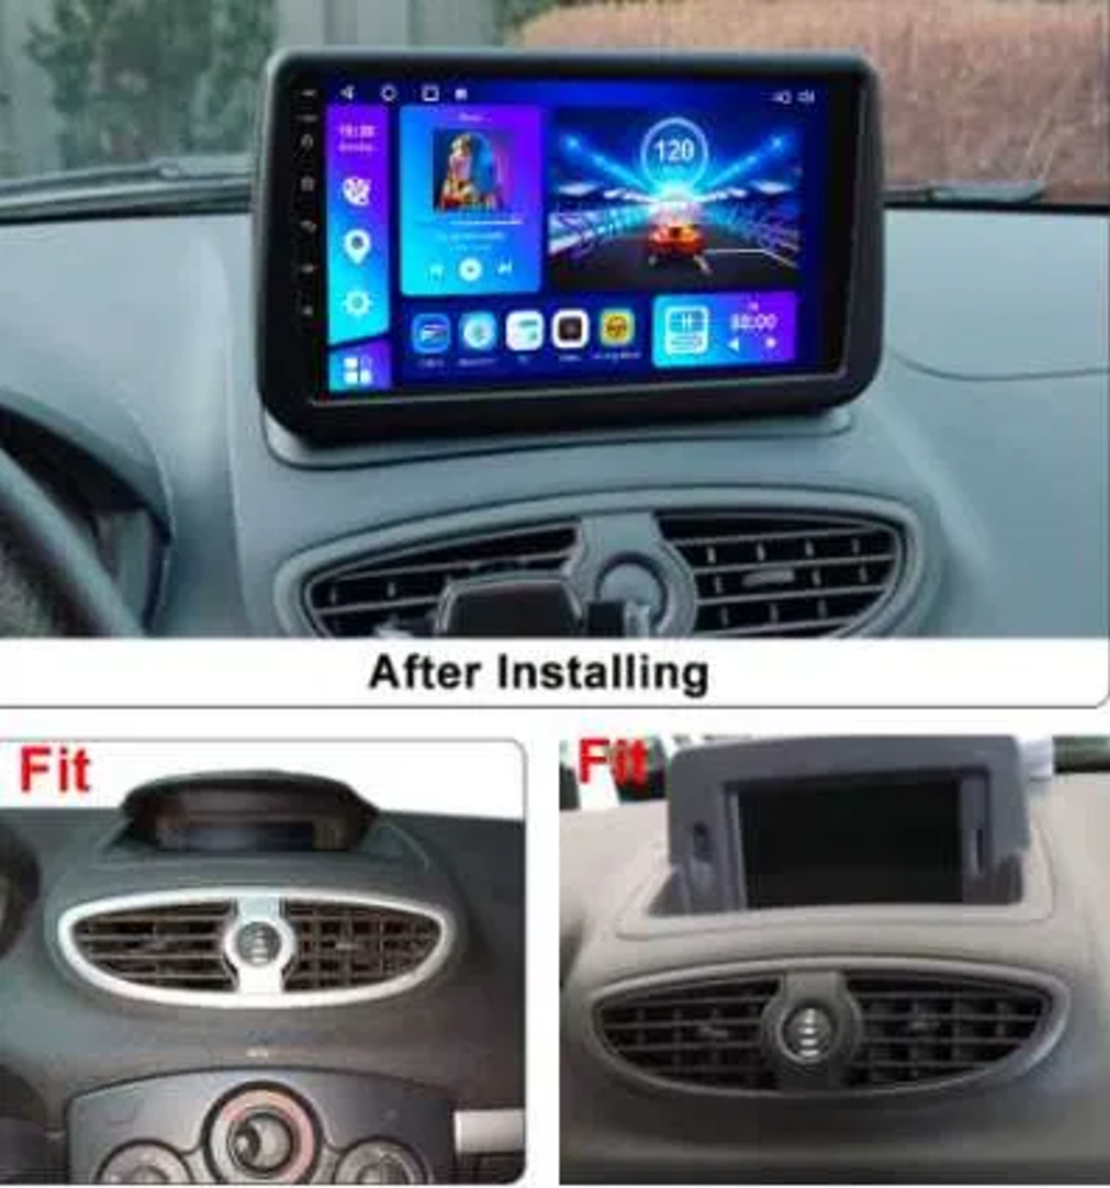 Android 13 Qled For Renault Clio 3 Clio 3 2005-2014 Wifi+4g Car Radio  Navigation Gps Auto Carplay Stereo Video Player 360 Camera